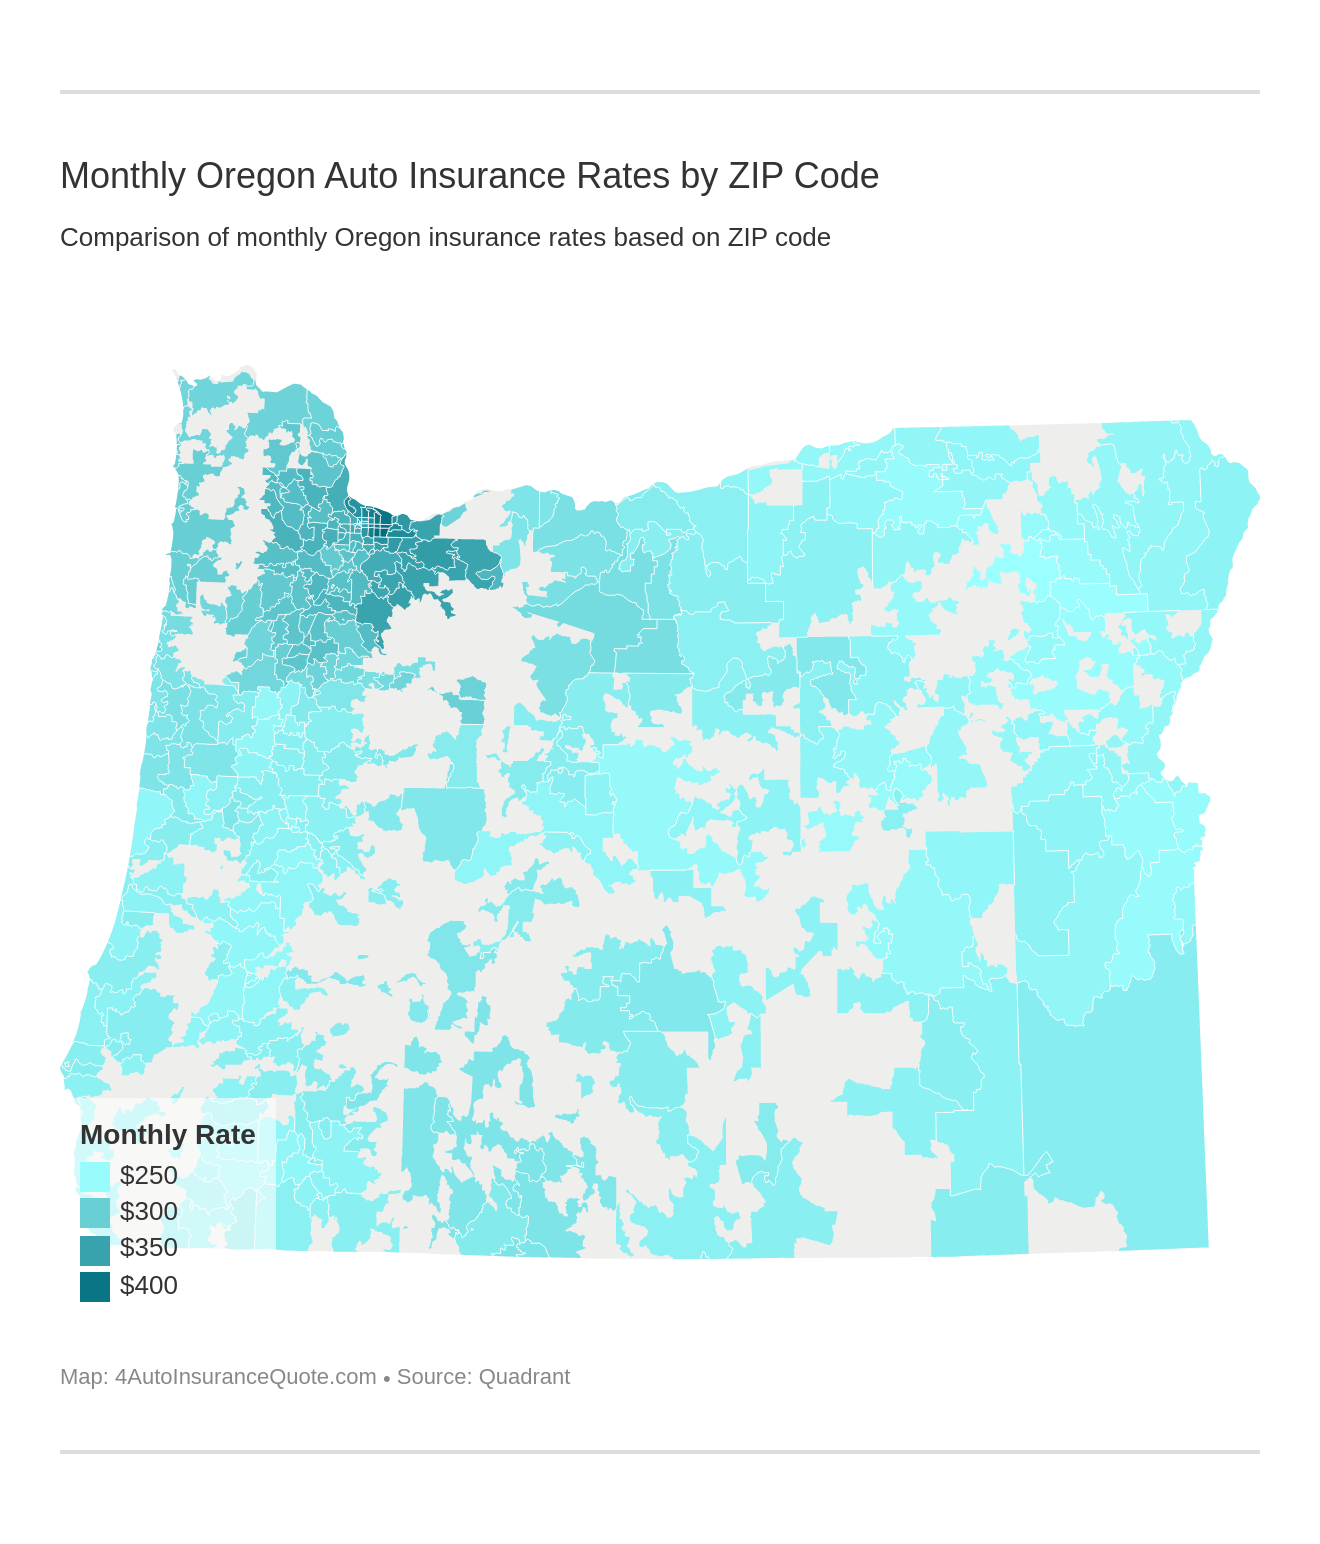 Monthly Oregon Auto Insurance Rates by ZIP Code